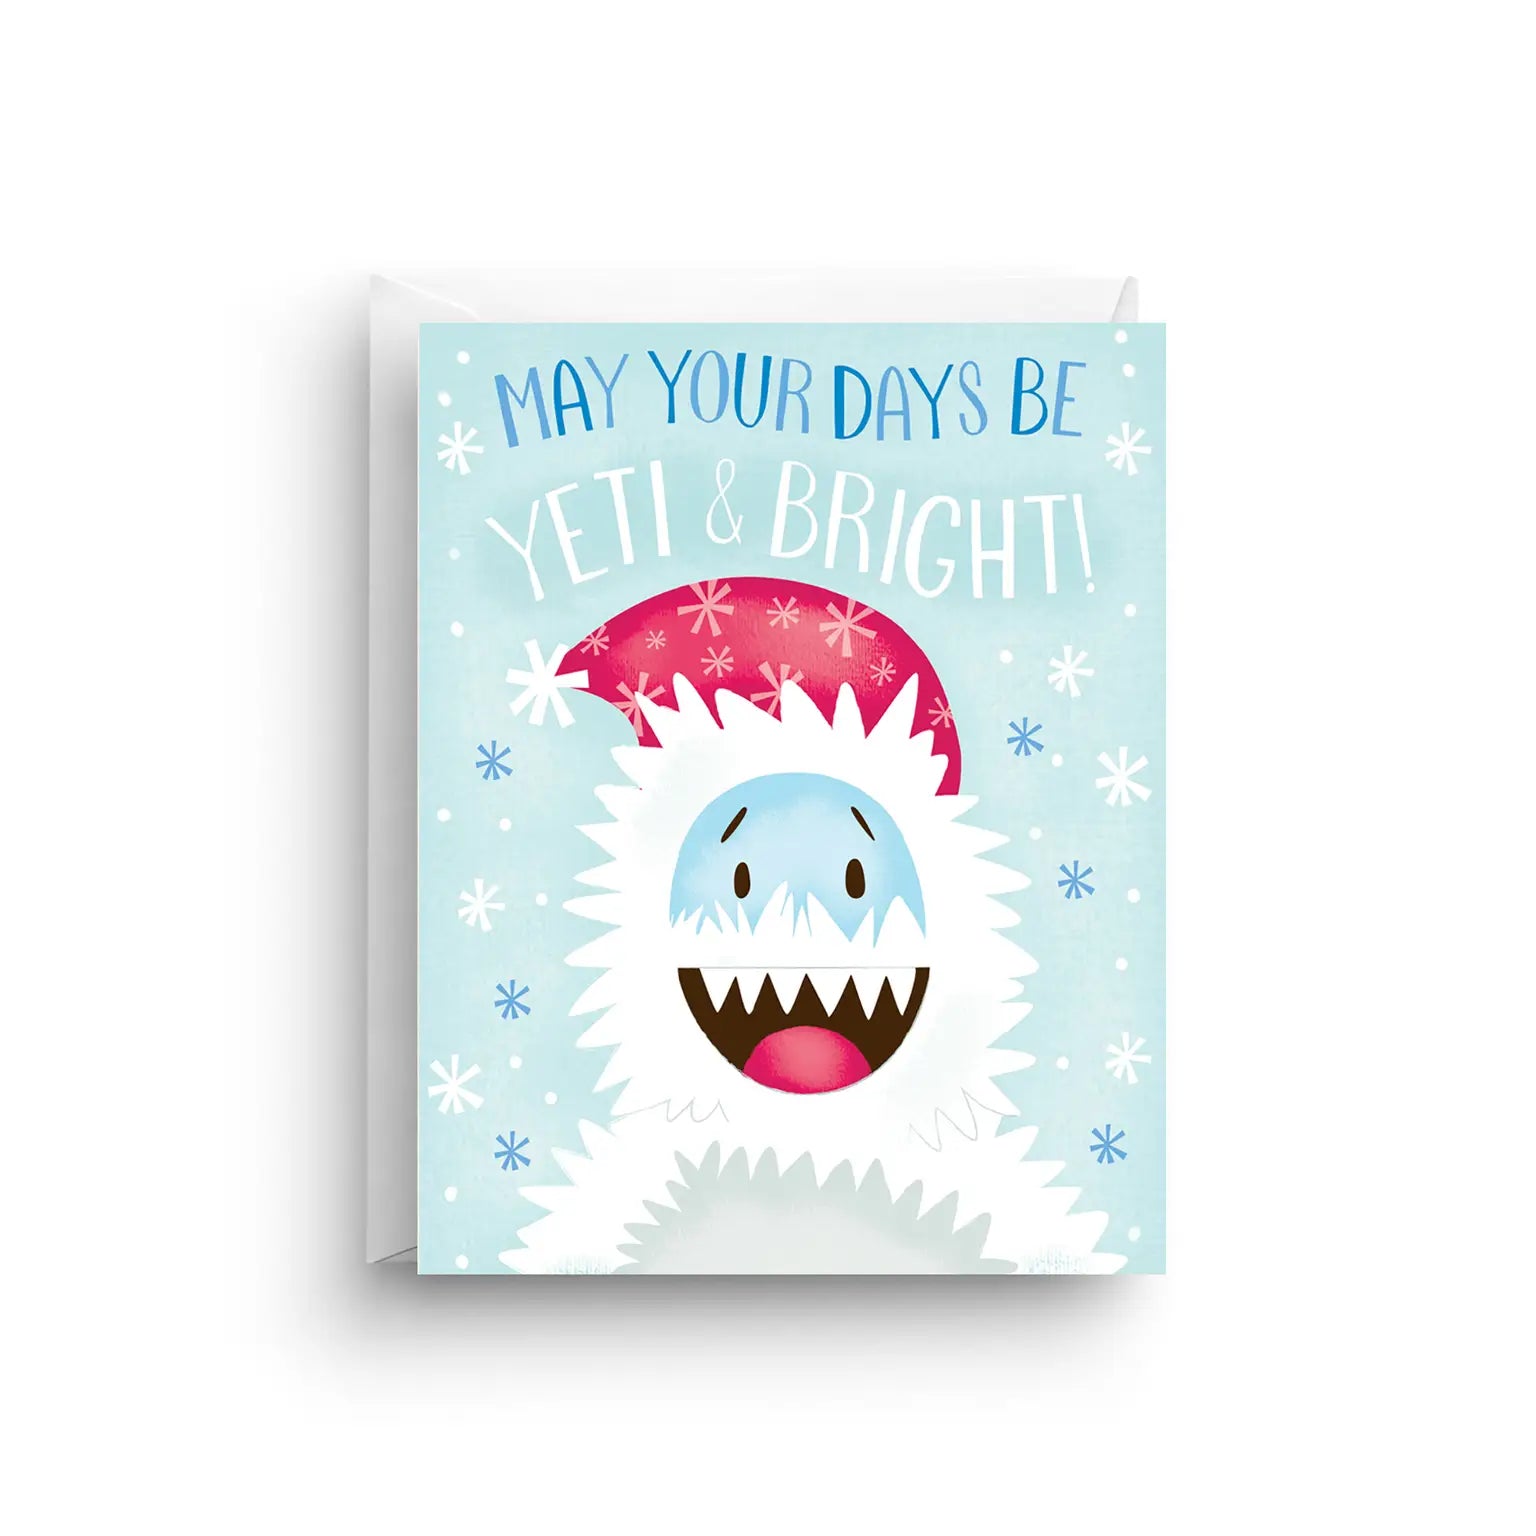 White card with light blue background and illustration of a white yeti wearing a red hat. Blue text reads "may your days be" and white text reads "yeti and bright" 